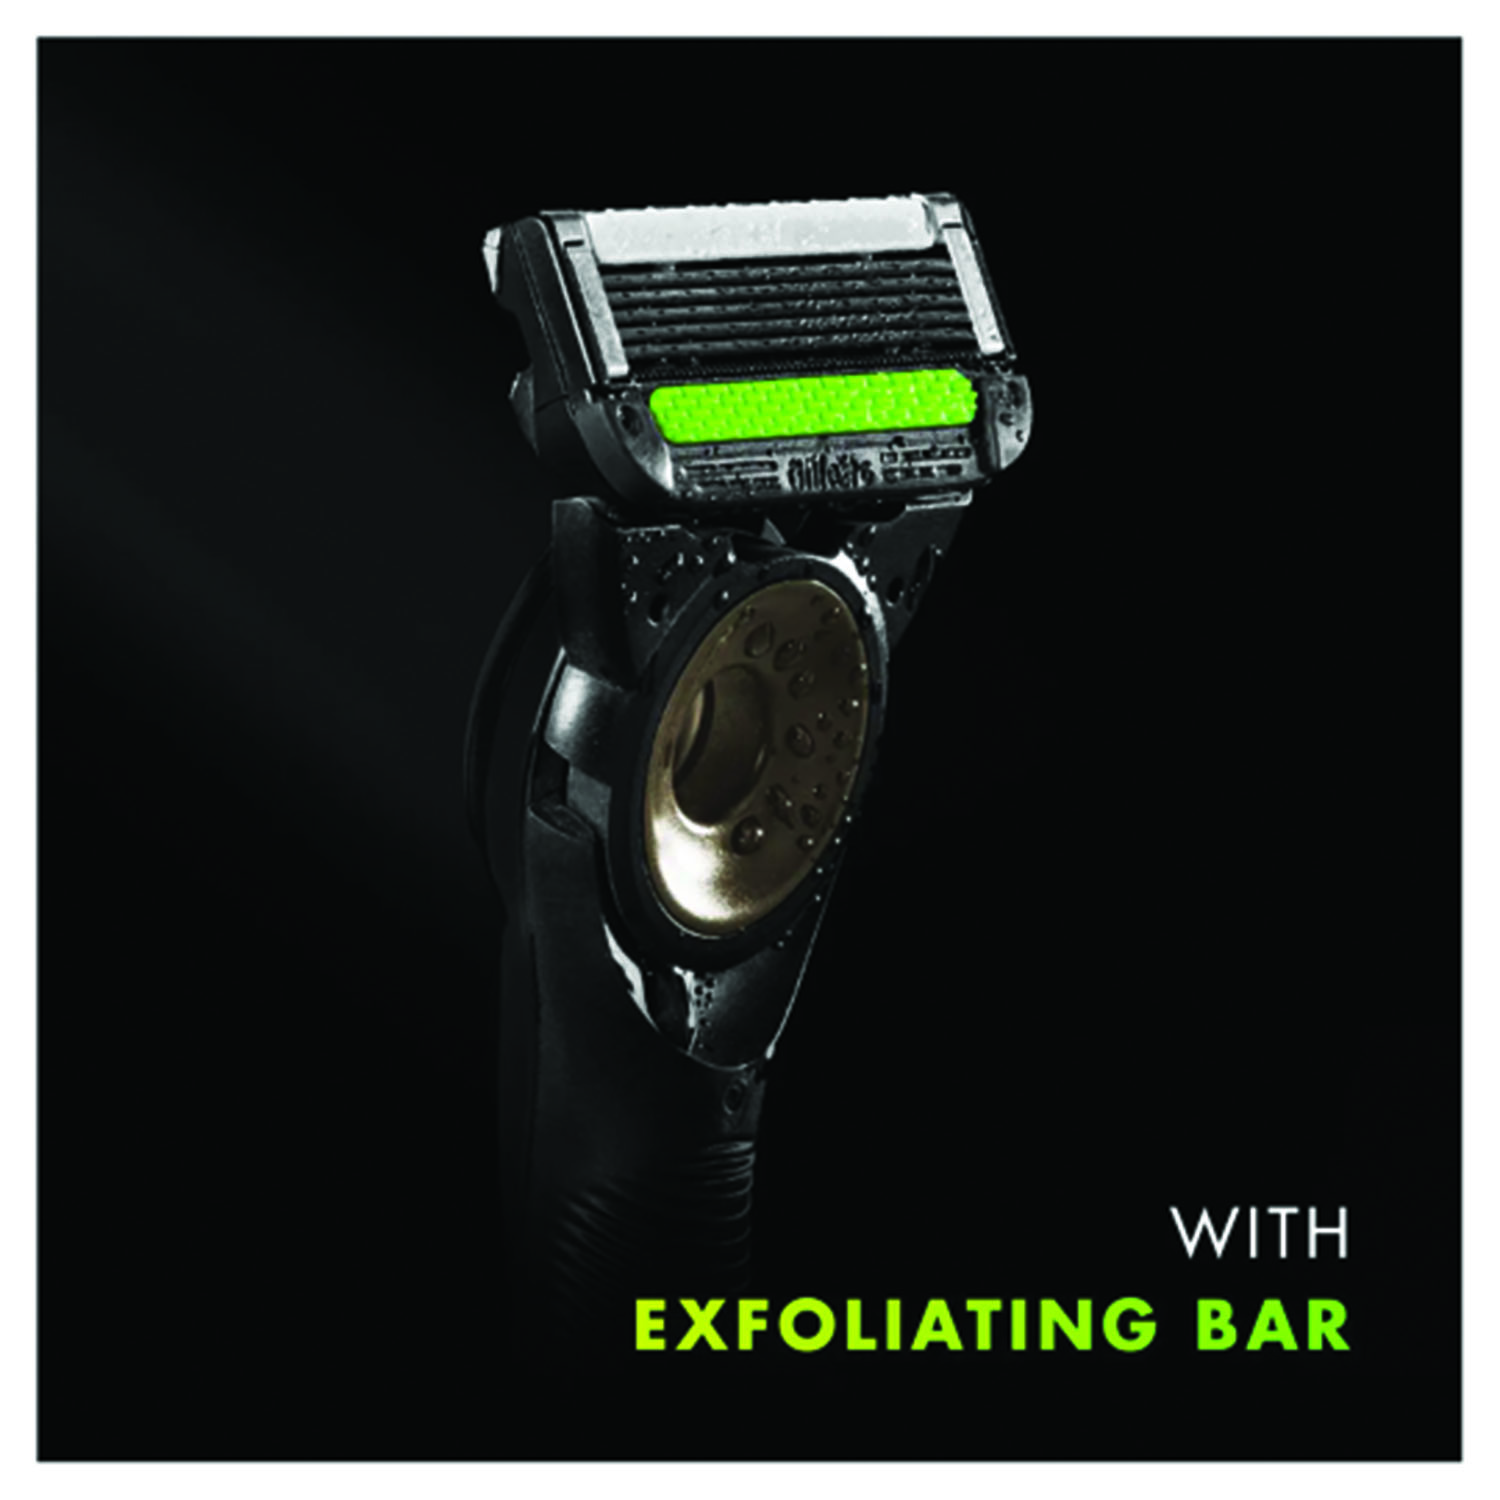 Built-in exfoliating technology